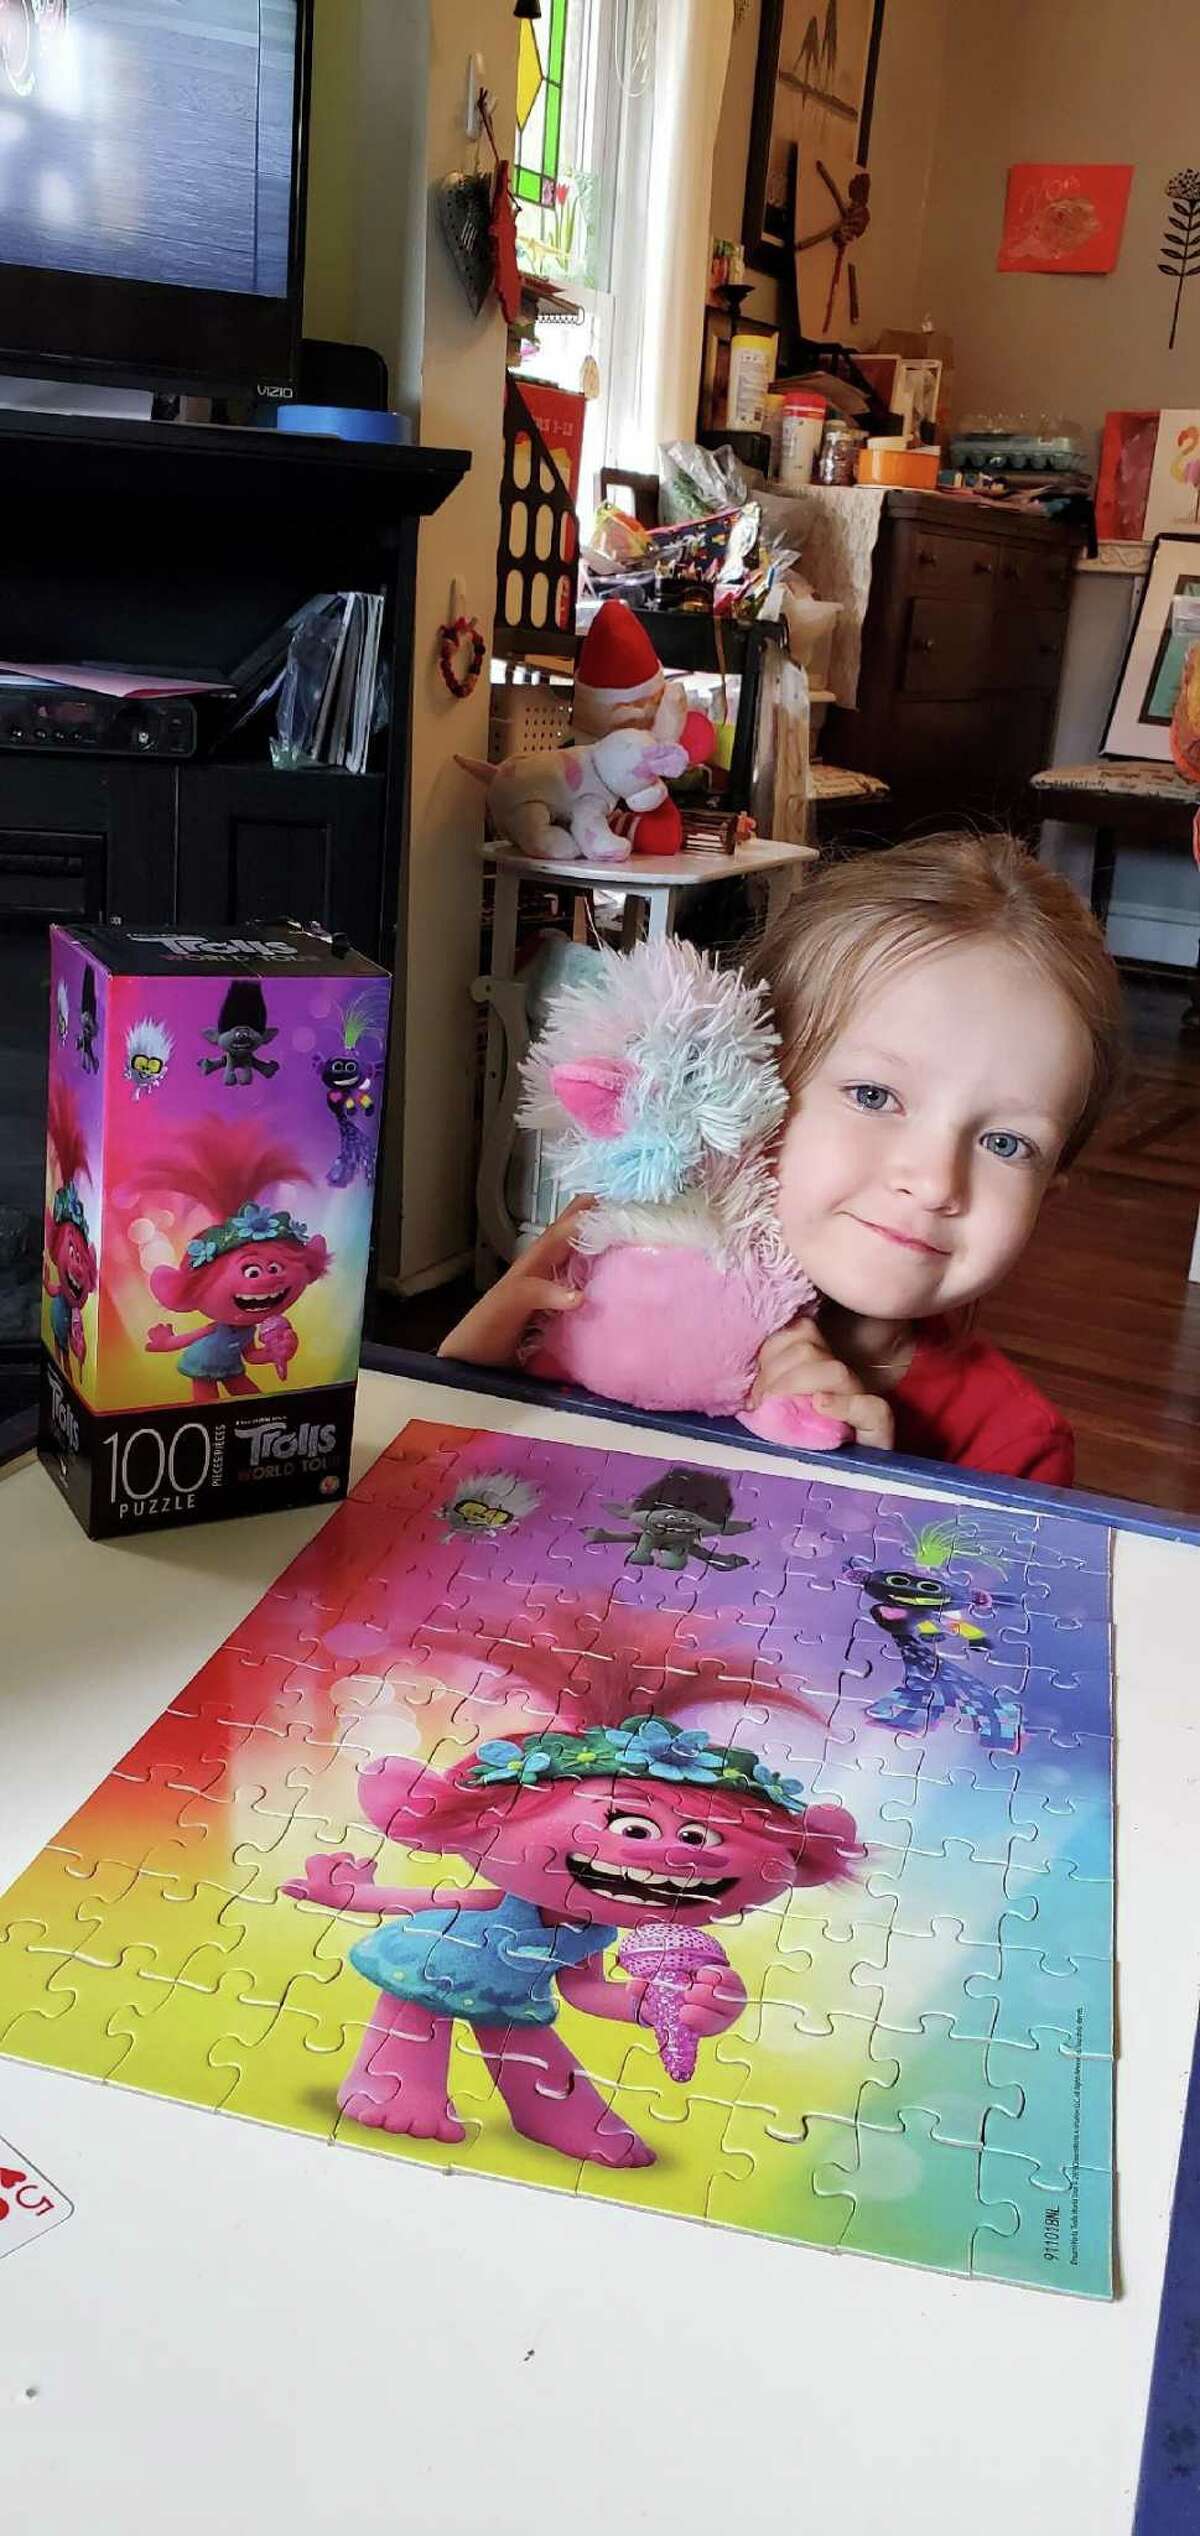 Noa Couture picked out a Trolls puzzle and a stuffed platypus from Cassetti’s toy stash.